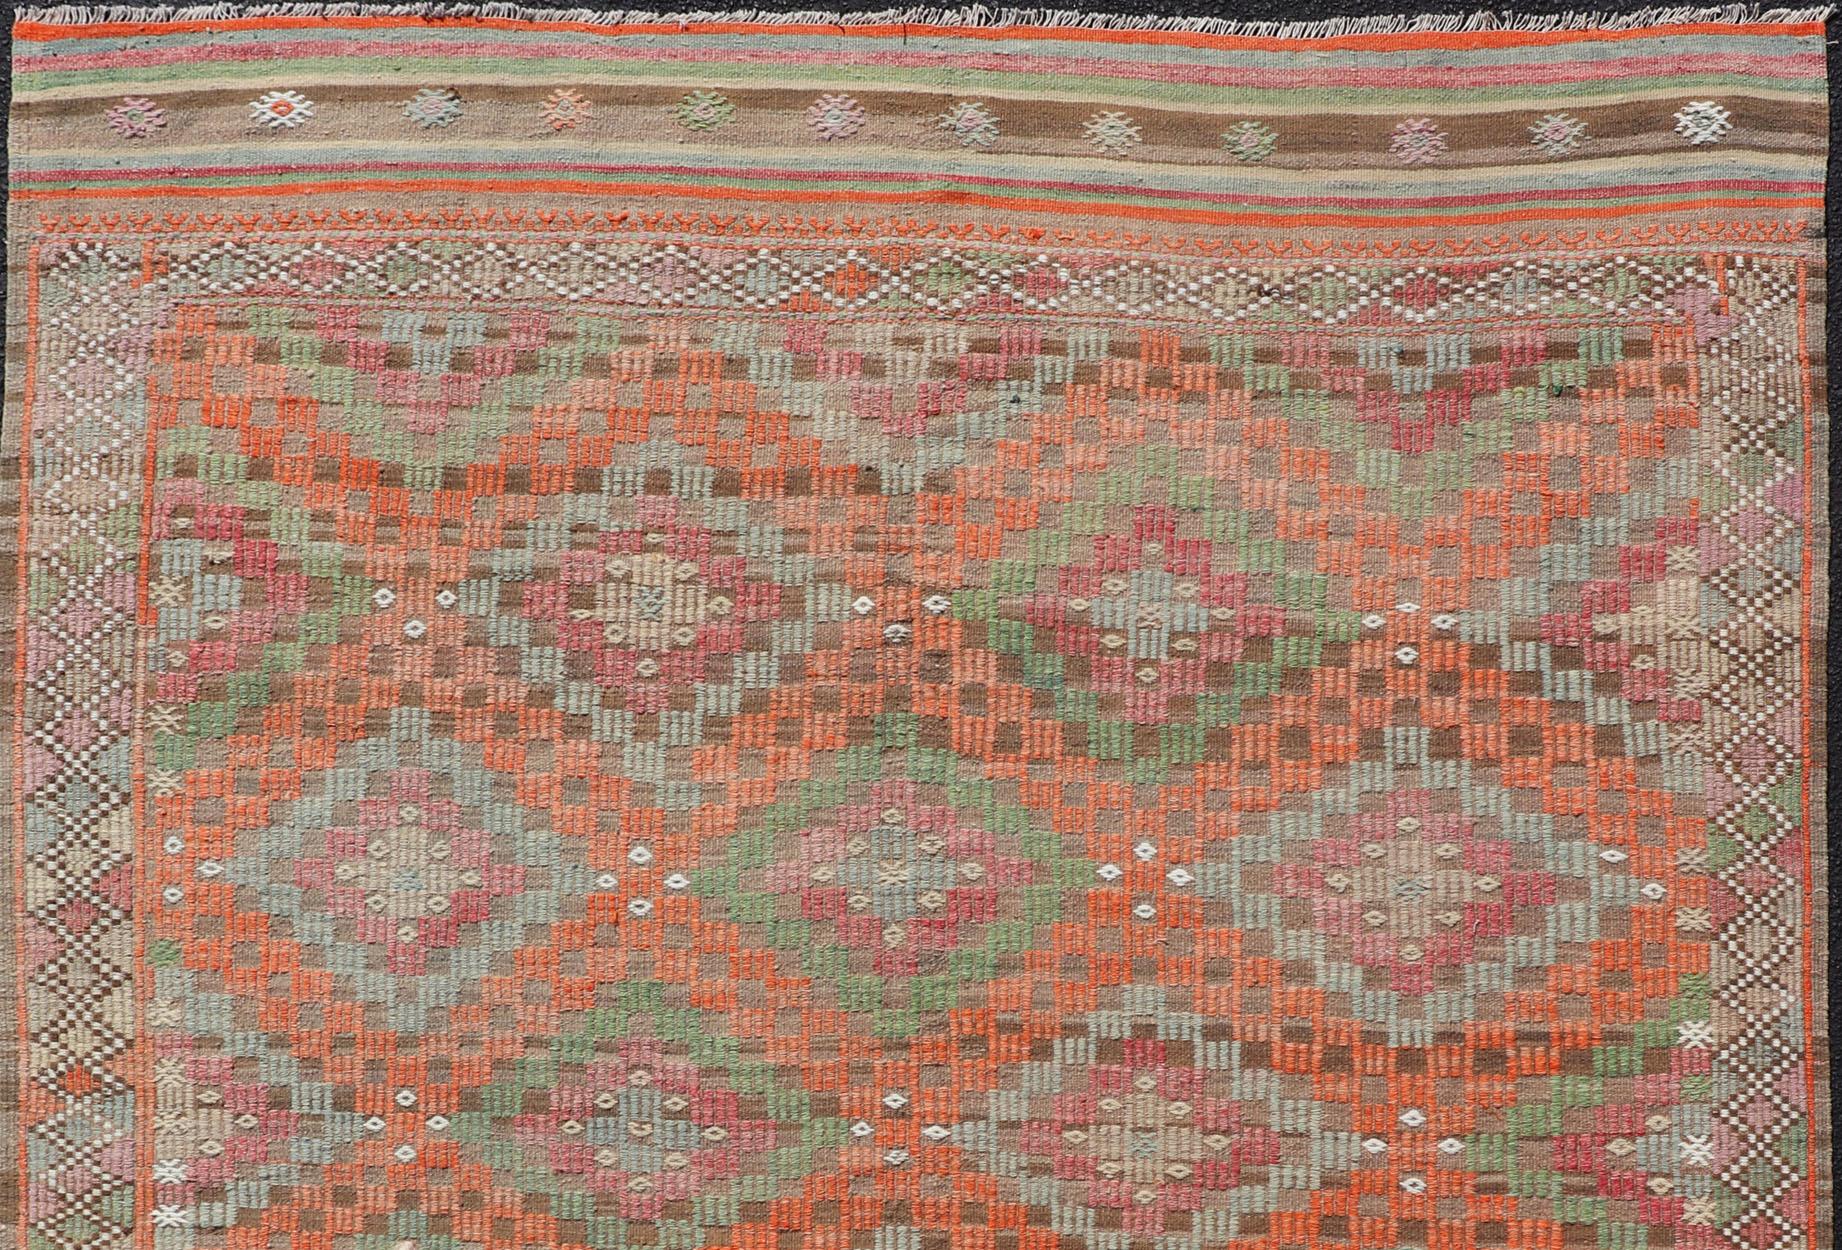 Hand-Woven Colorful Vintage Turkish Embroidered Flat-Weave in Diamond Design in Orange For Sale